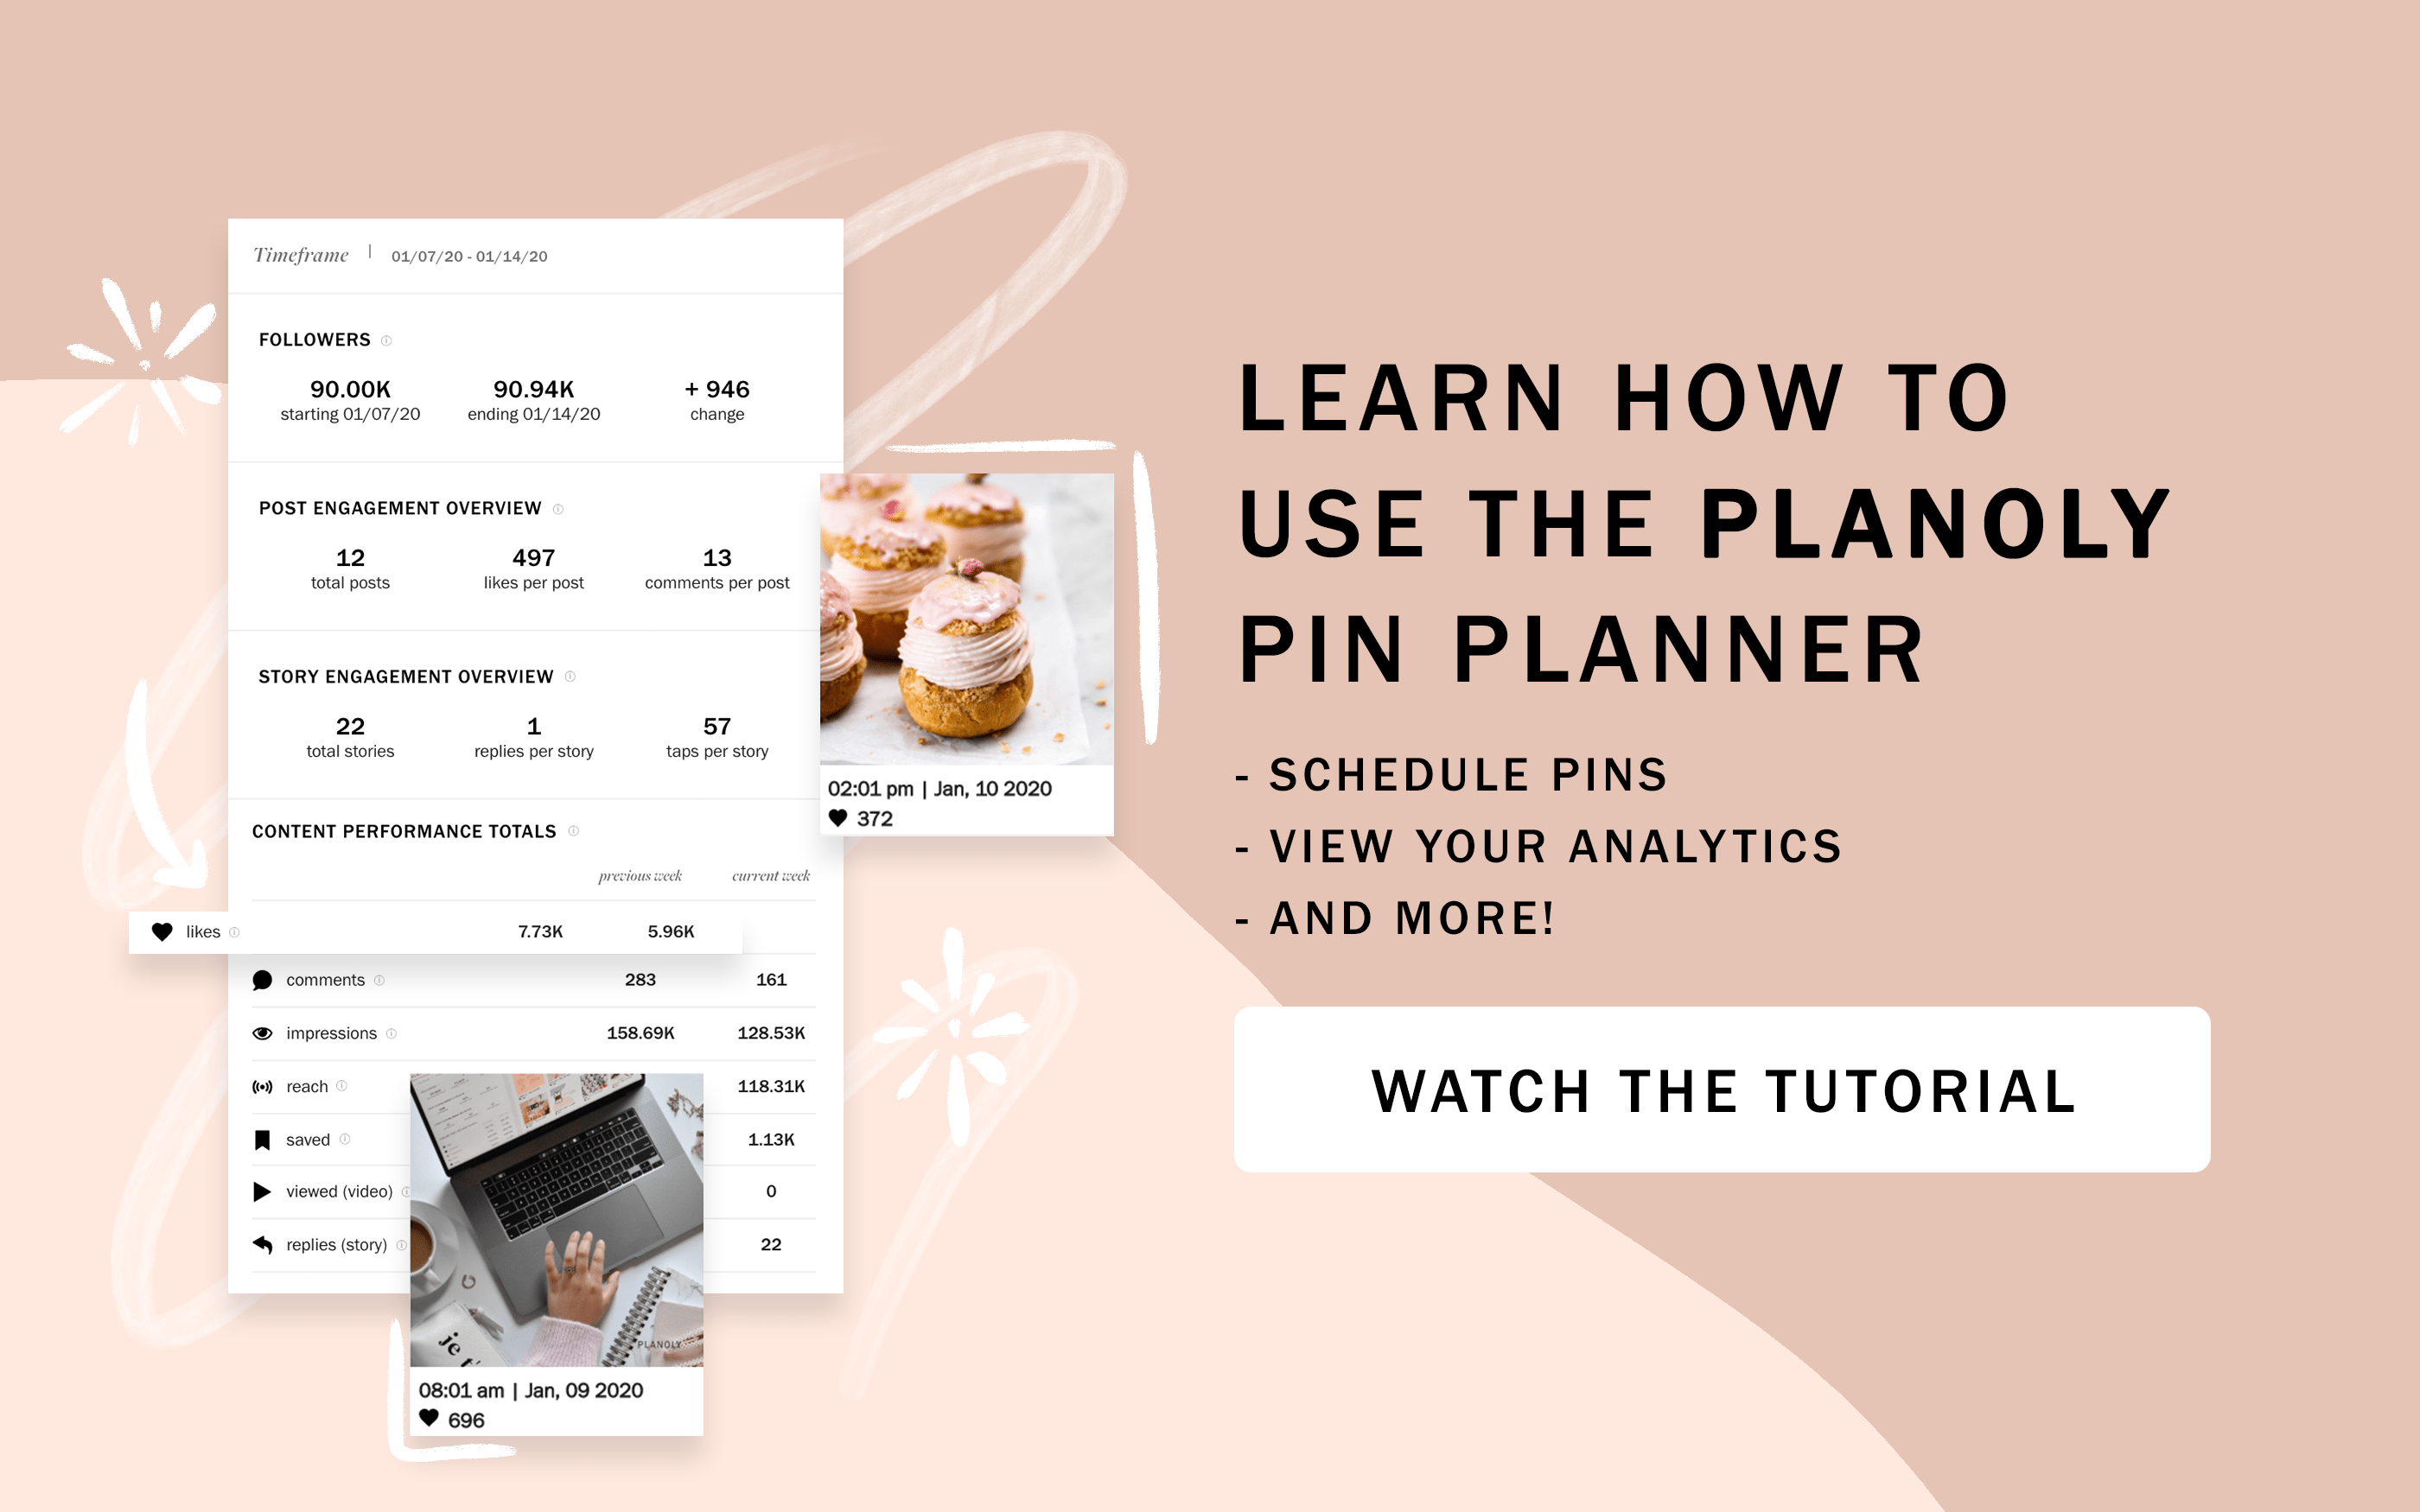 How to Increase Pinterest Engagement Using 'Campaigns' for PLANOLY Pin Planner